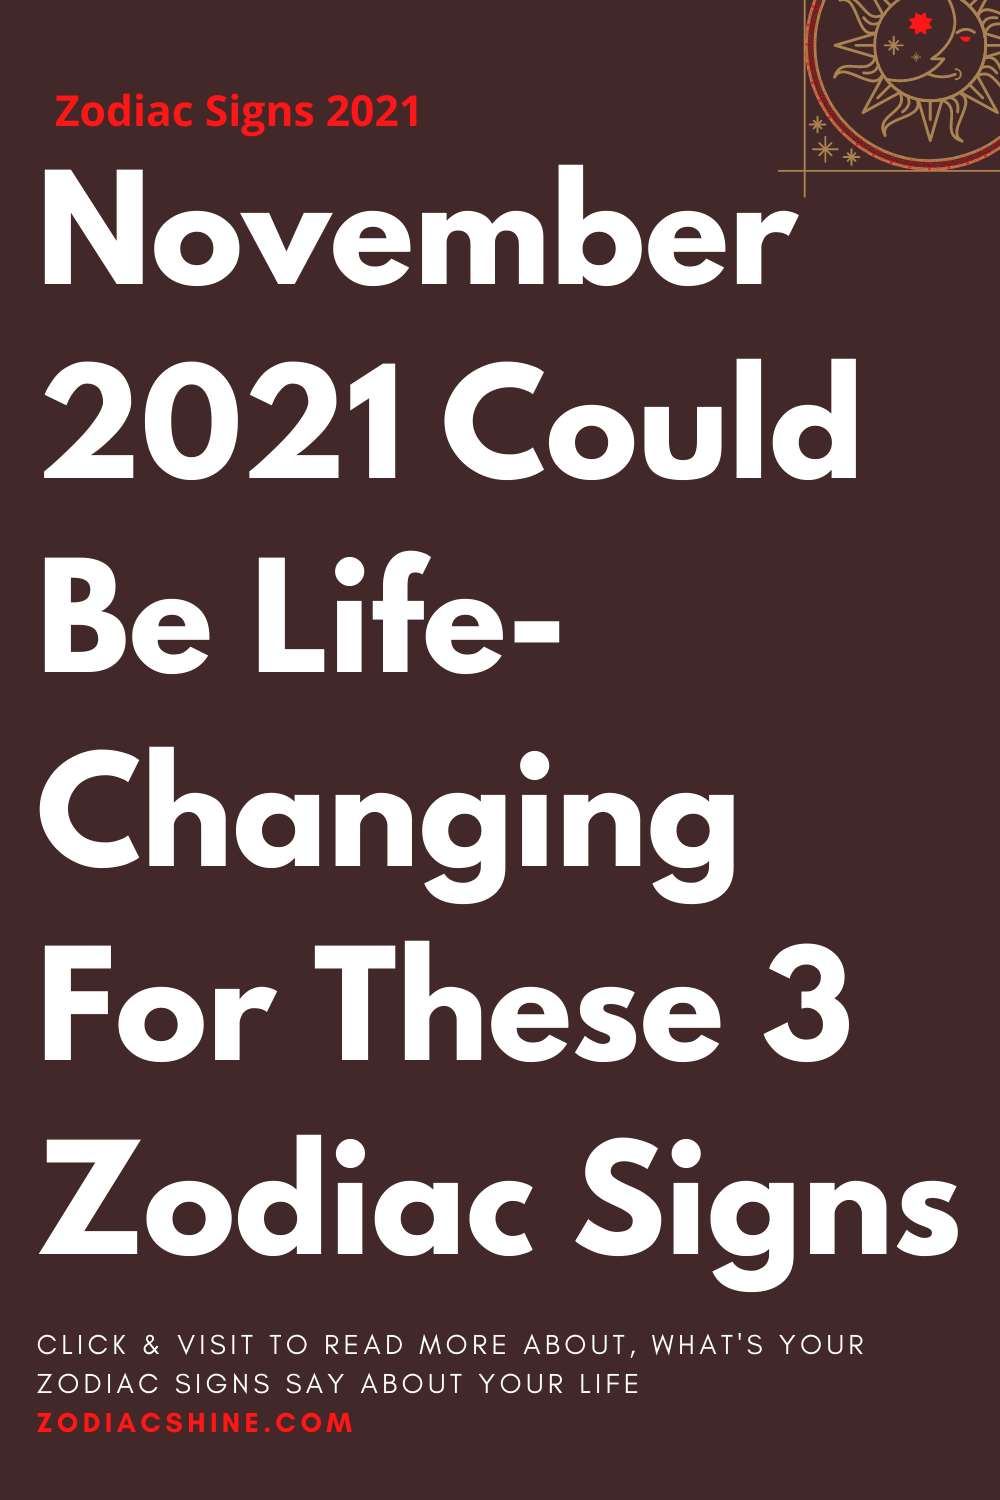 November 2021 Could Be Life-Changing For These 3 Zodiac Signs